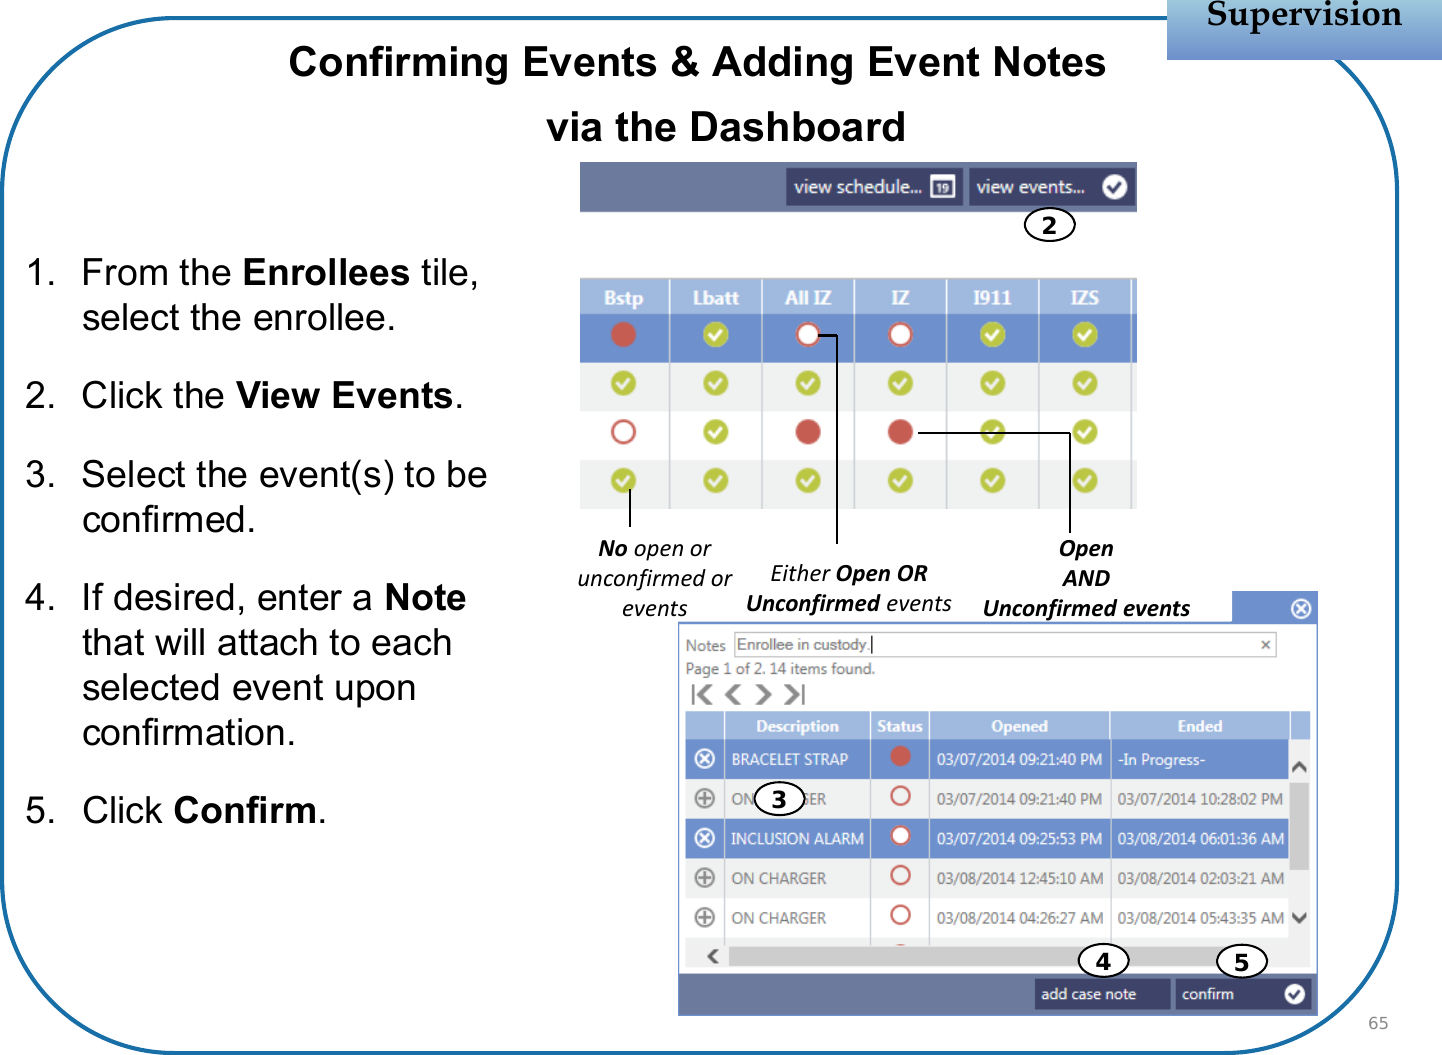 354Confirming Events &amp; Adding Event Notesvia the DashboardSupervisionSupervision1. From the Enrollees tile, select the enrollee.2. Click the View Events.3. Select the event(s) to be confirmed.4. If desired, enter a Notethat will attach to each selected event upon confirmation.5. Click Confirm.652No openorunconfirmedoreventsEitherOpen ORUnconfirmed eventsOpenANDUnconfirmedevents